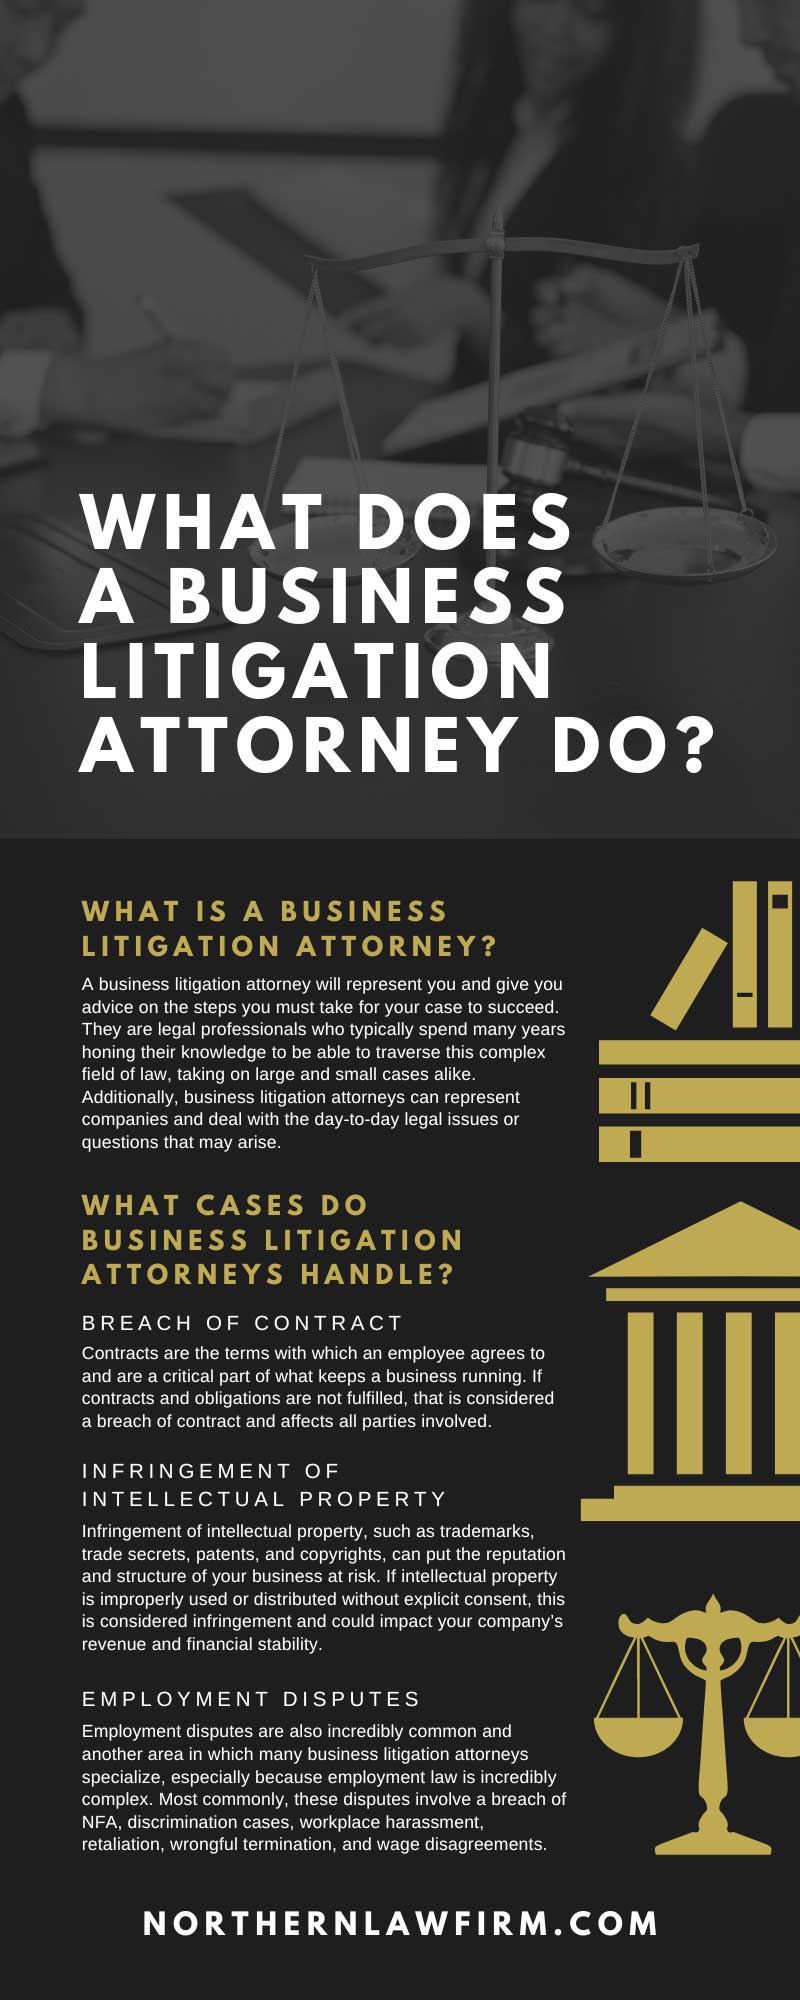 What Does a Business Litigation Attorney Do?